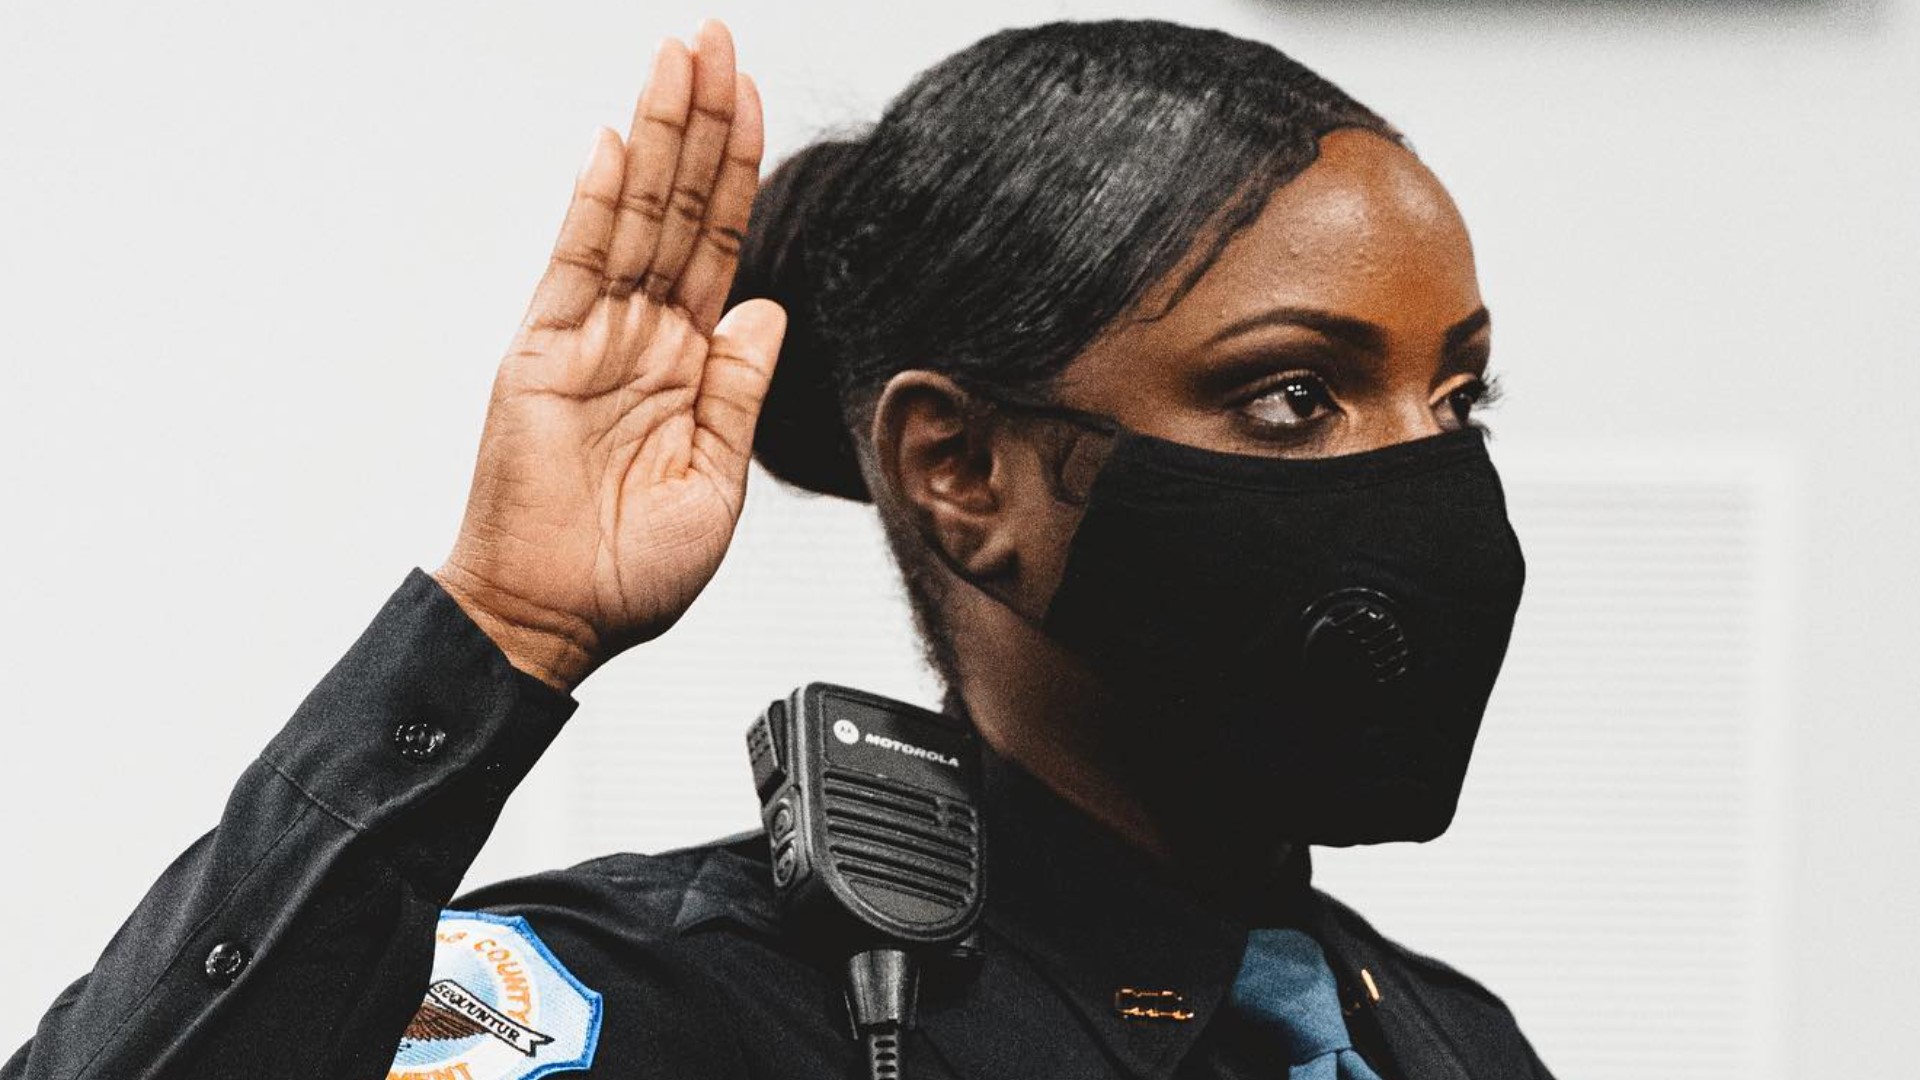 A conversation with a Cobb County Police officer changed her life. Now, Miaja Jefferson is on her way to becoming a police officer and hopes to inspire other kids.